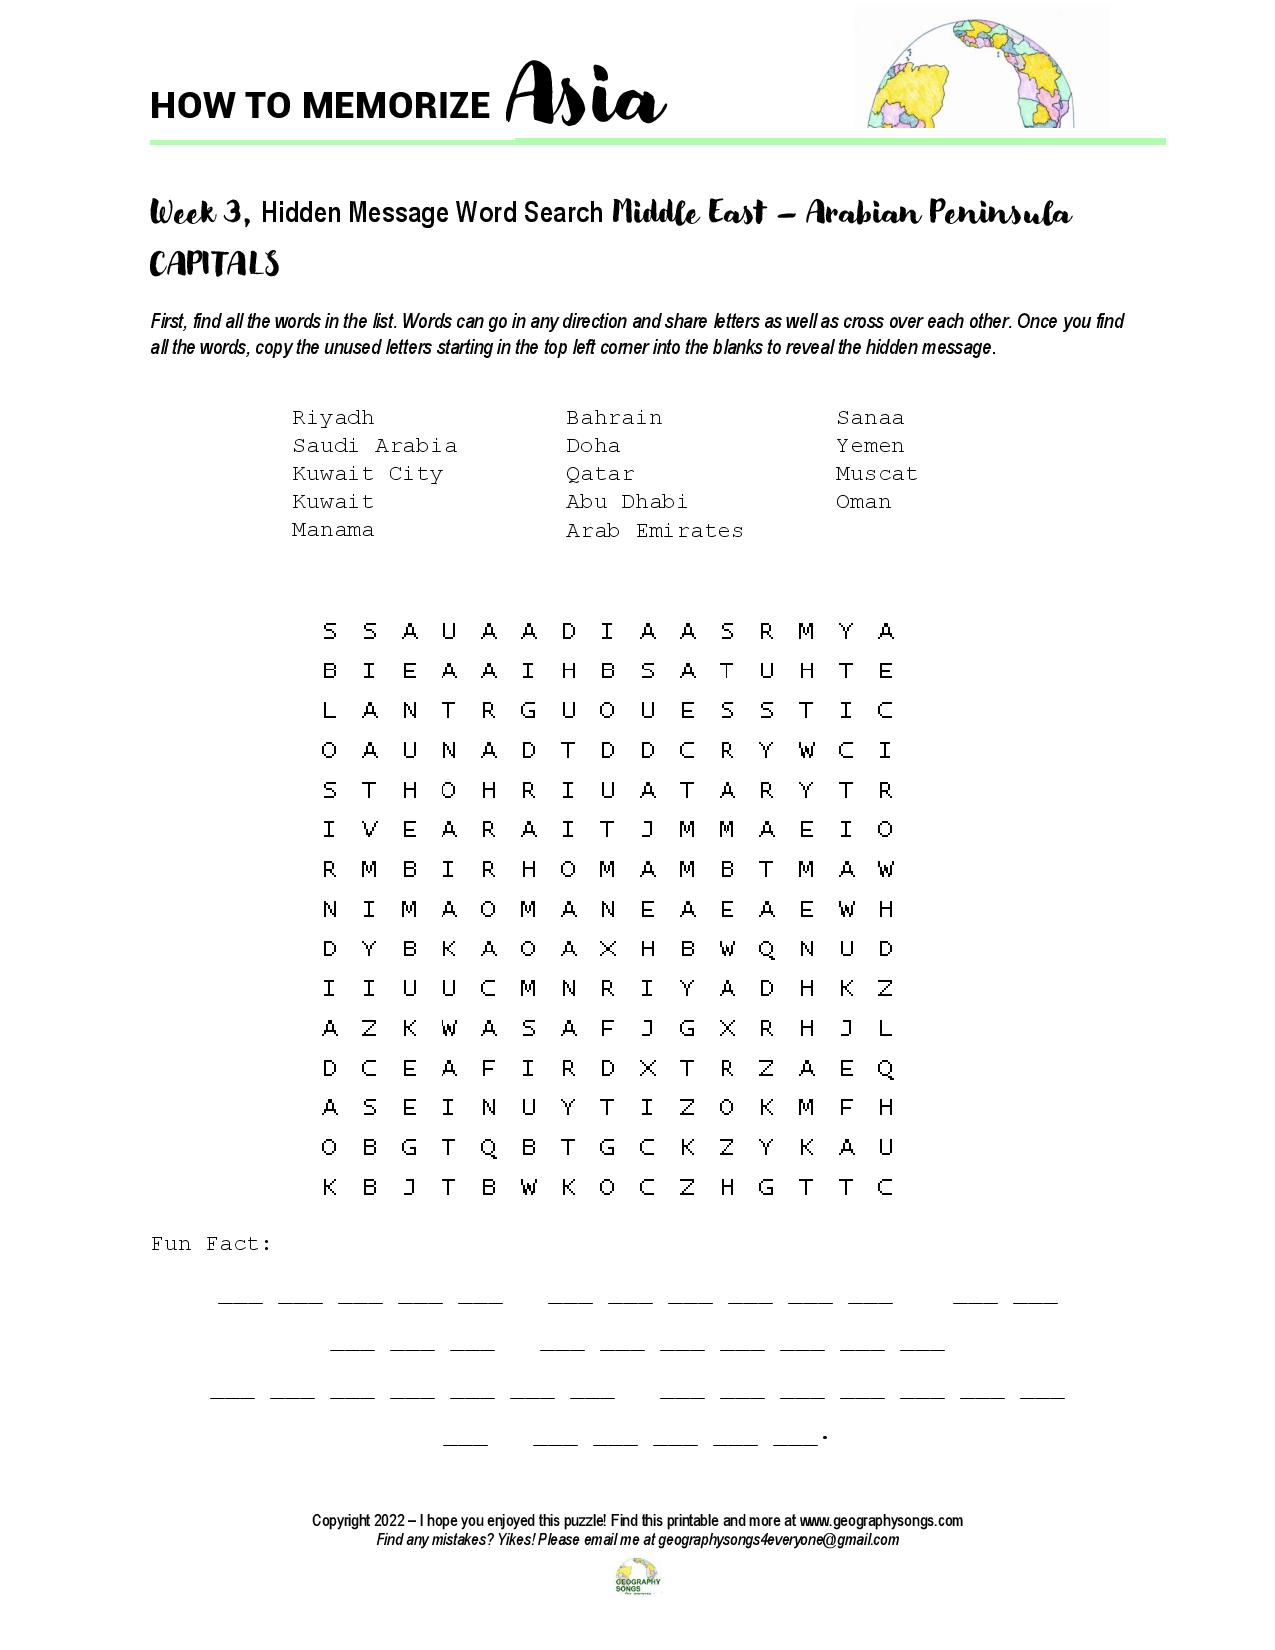 Asia-Capitals-HiddenMessage-WordSearch-page-005